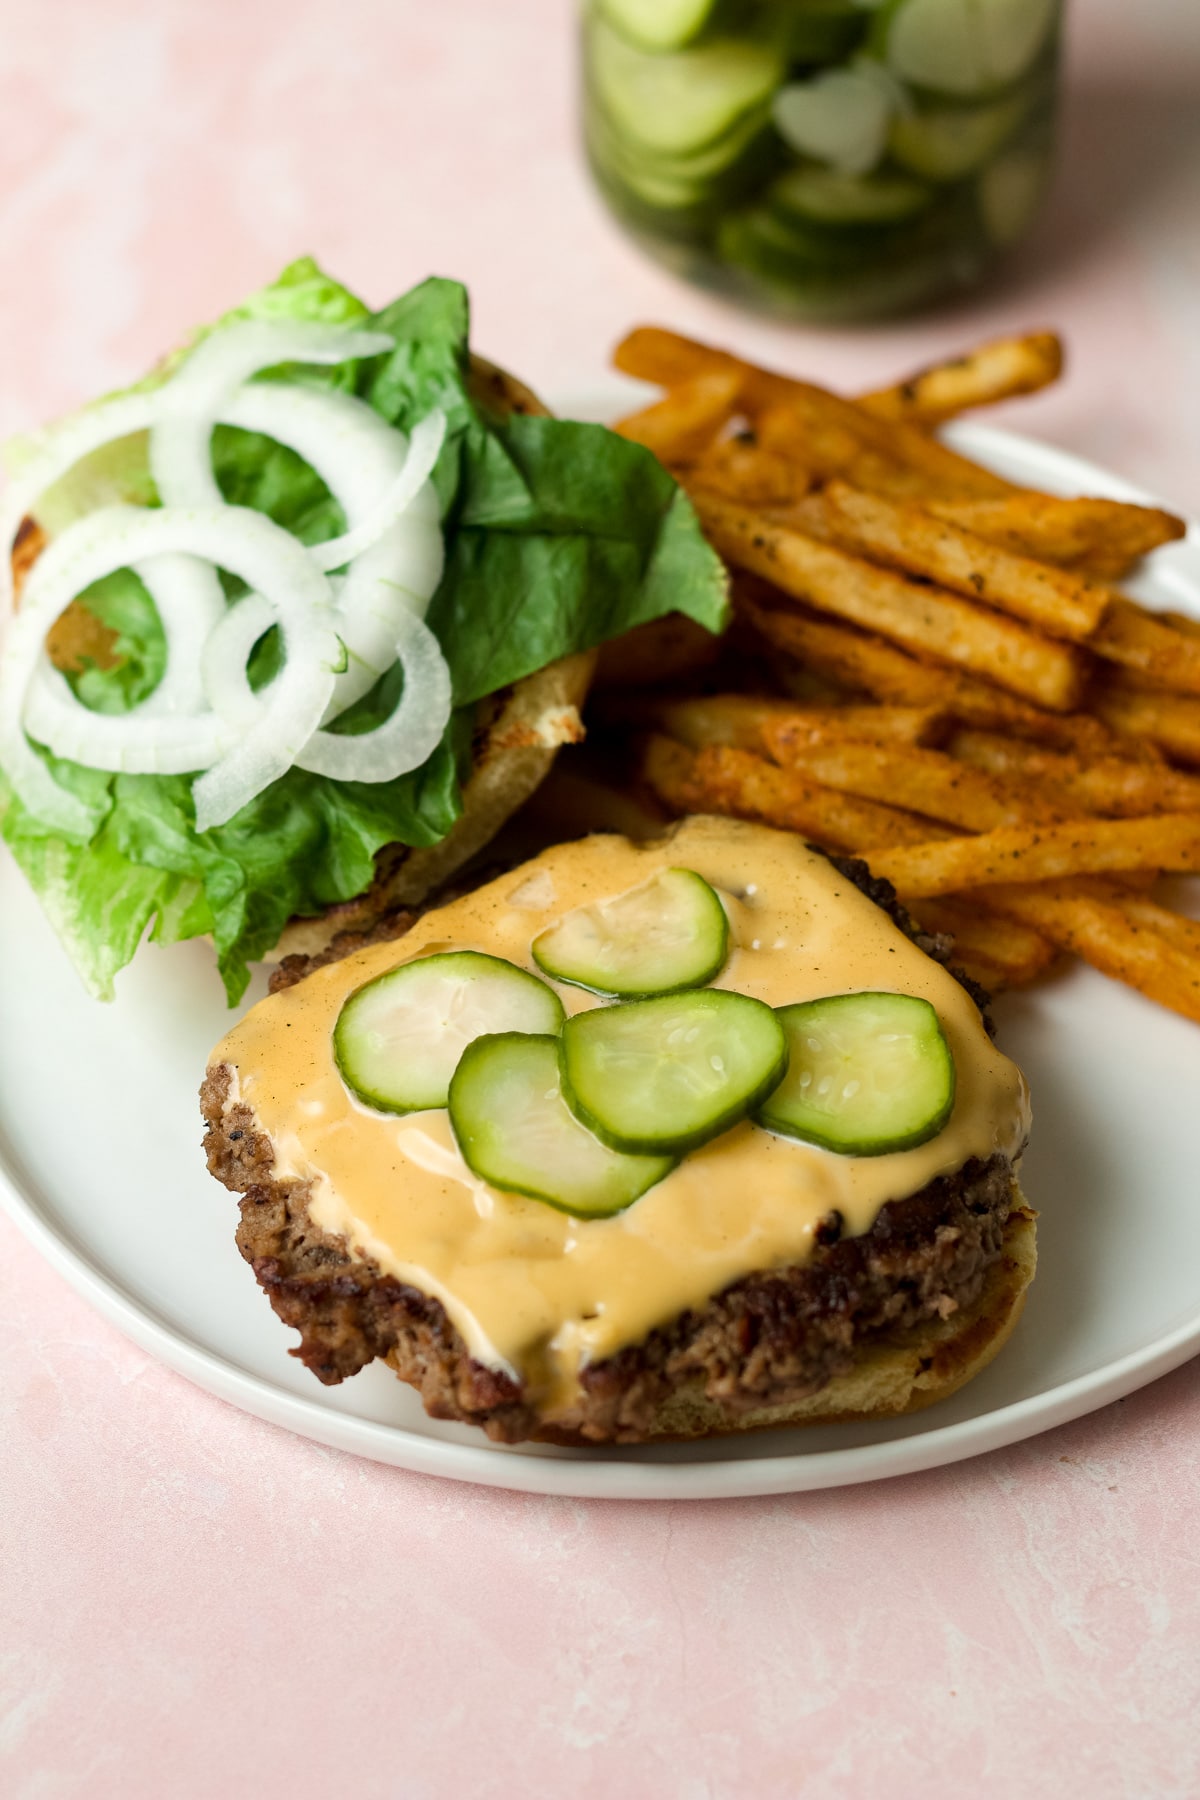 Burger and fries on plate with refrigerator dill pickles.